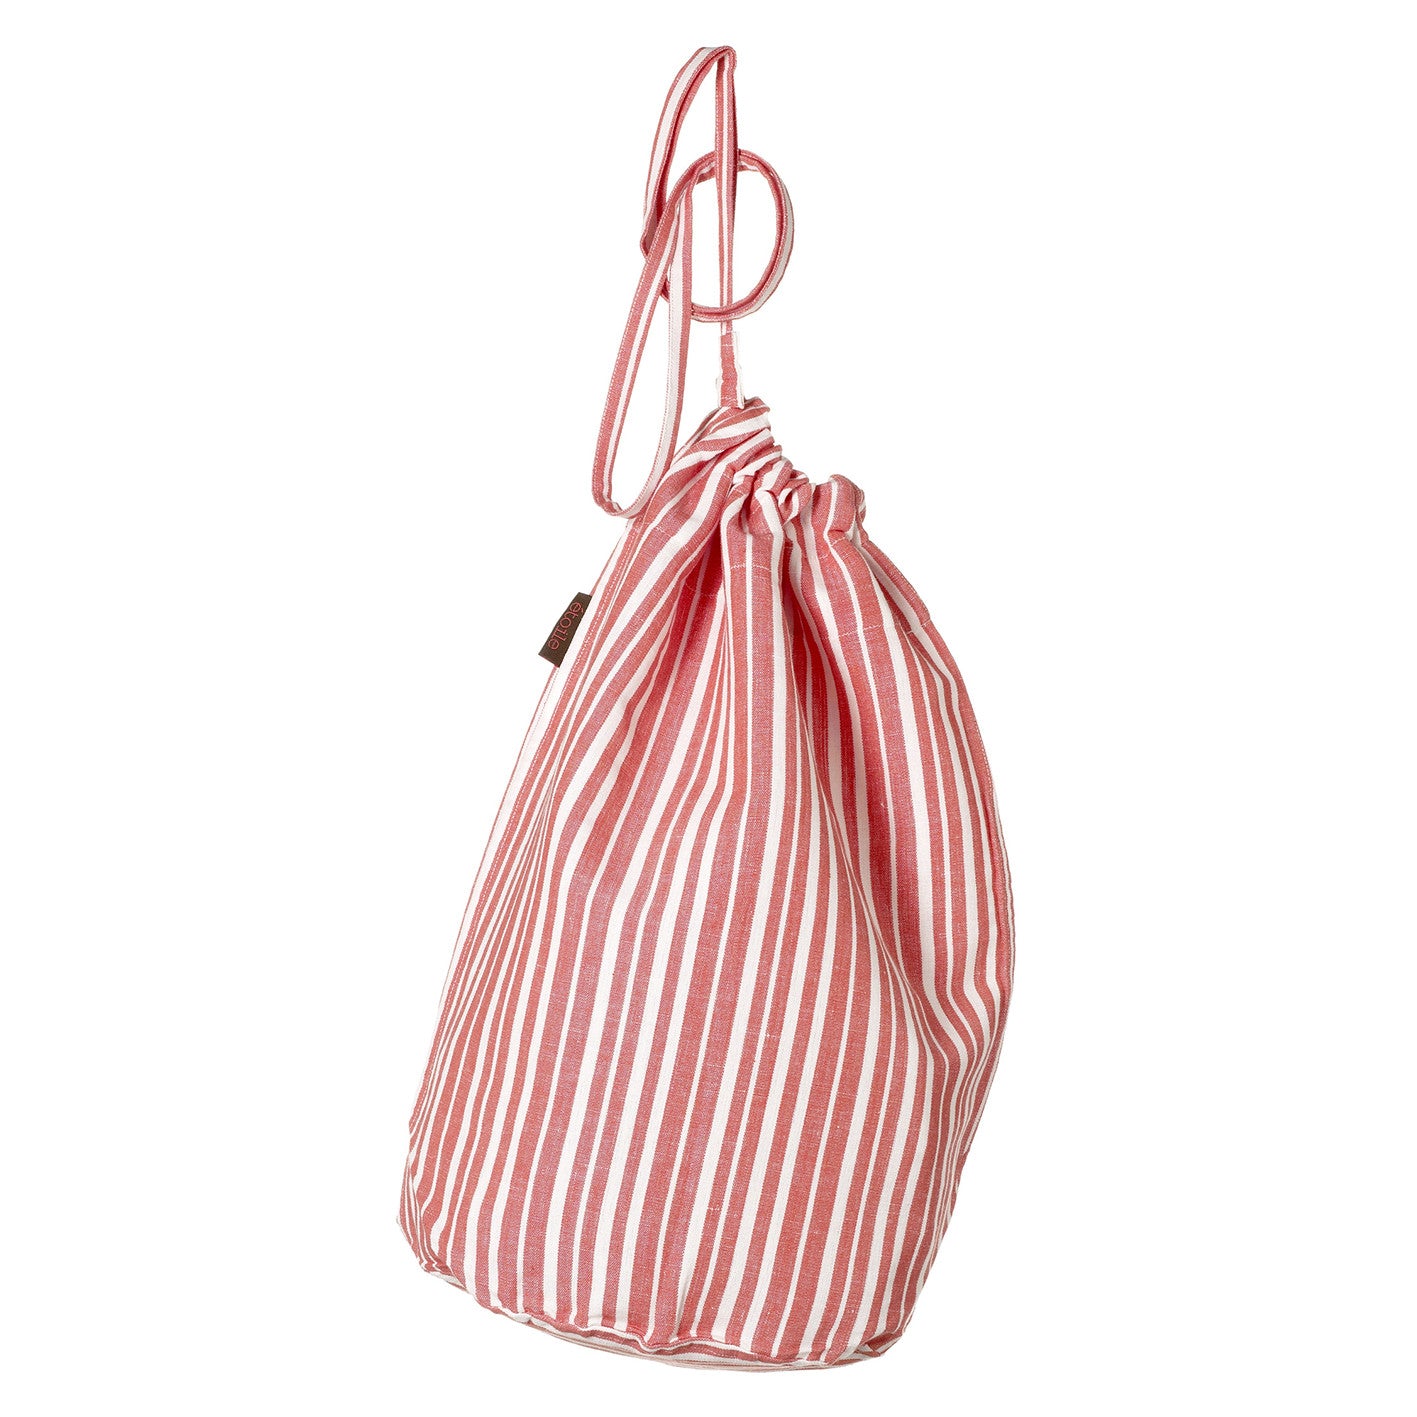 Palermo Ticking Stripe Cotton Linen Drawstring Laundry & Storage Bag in Geranium Red Ships from Canada (USA)